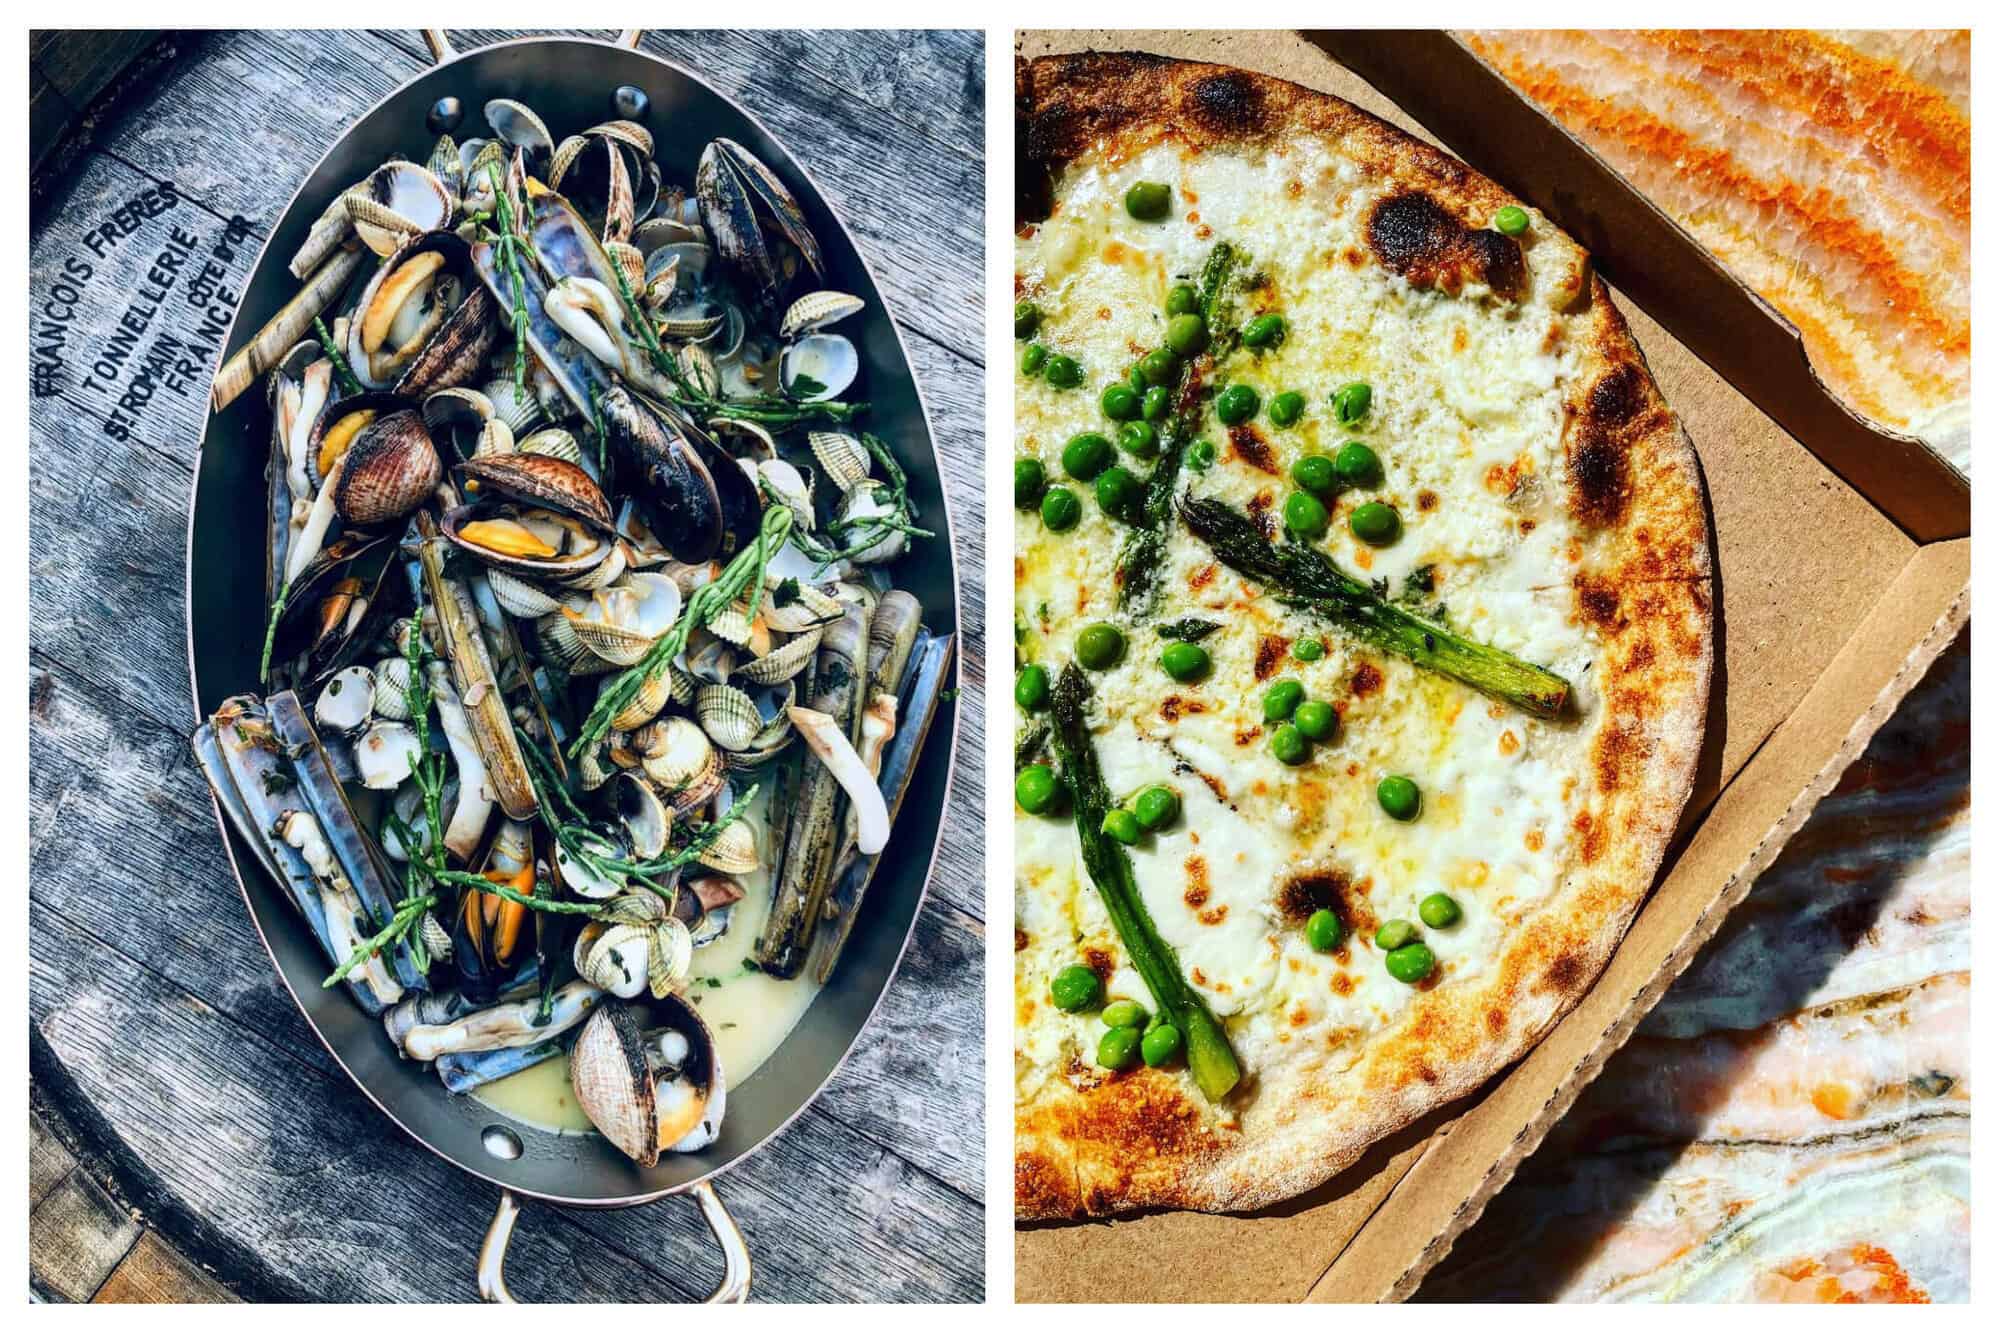 Left: a seafood dish on a table at the restaurant Bonvivant. Right: a pizza in a takeaway box on a table at Bonvivant.